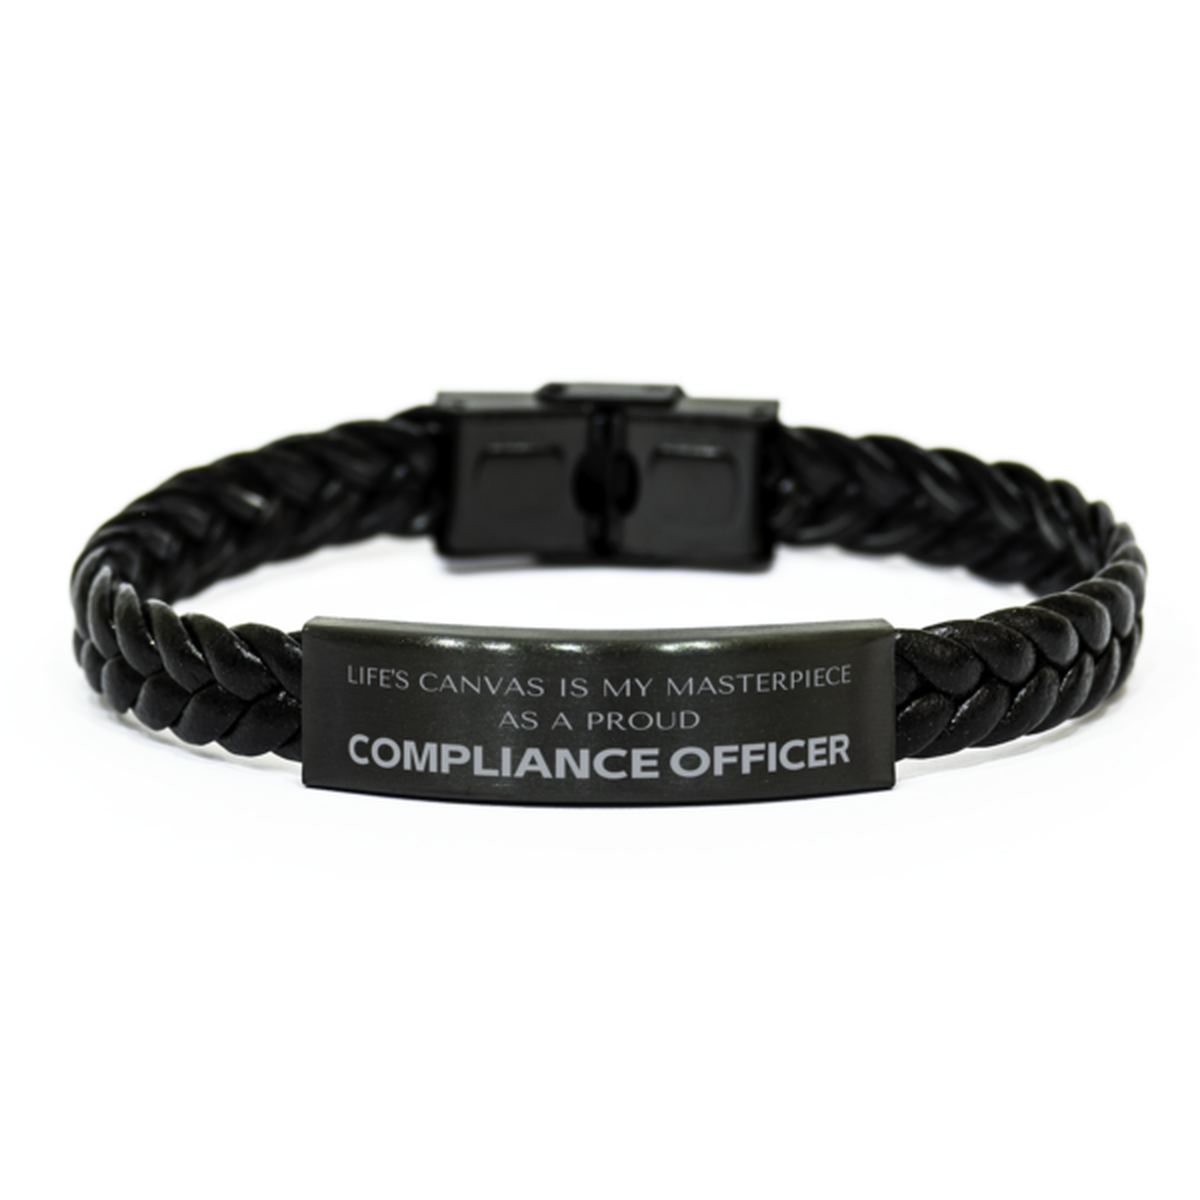 Proud Compliance Officer Gifts, Life's canvas is my masterpiece, Epic Birthday Christmas Unique Braided Leather Bracelet For Compliance Officer, Coworkers, Men, Women, Friends